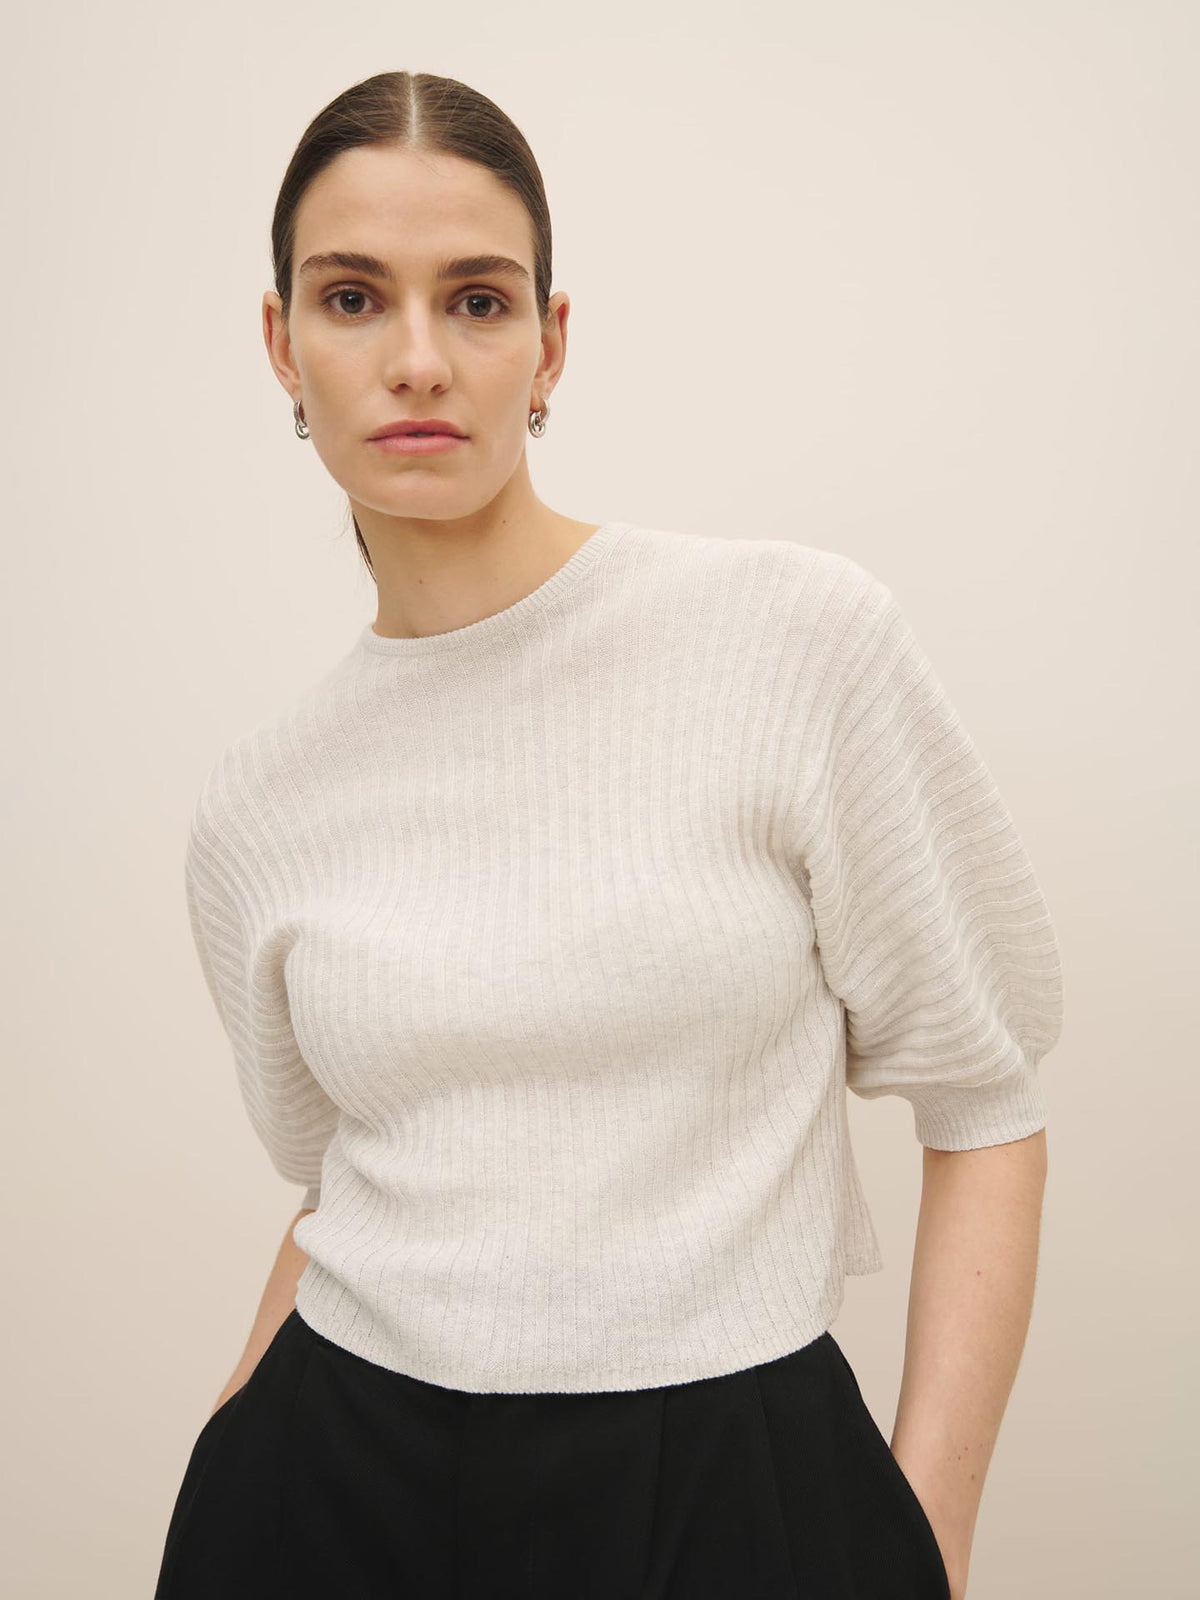 Woman in a Quinn Top - Light Marle by Kowtow and black skirt, both ethically made, posing against a neutral background.